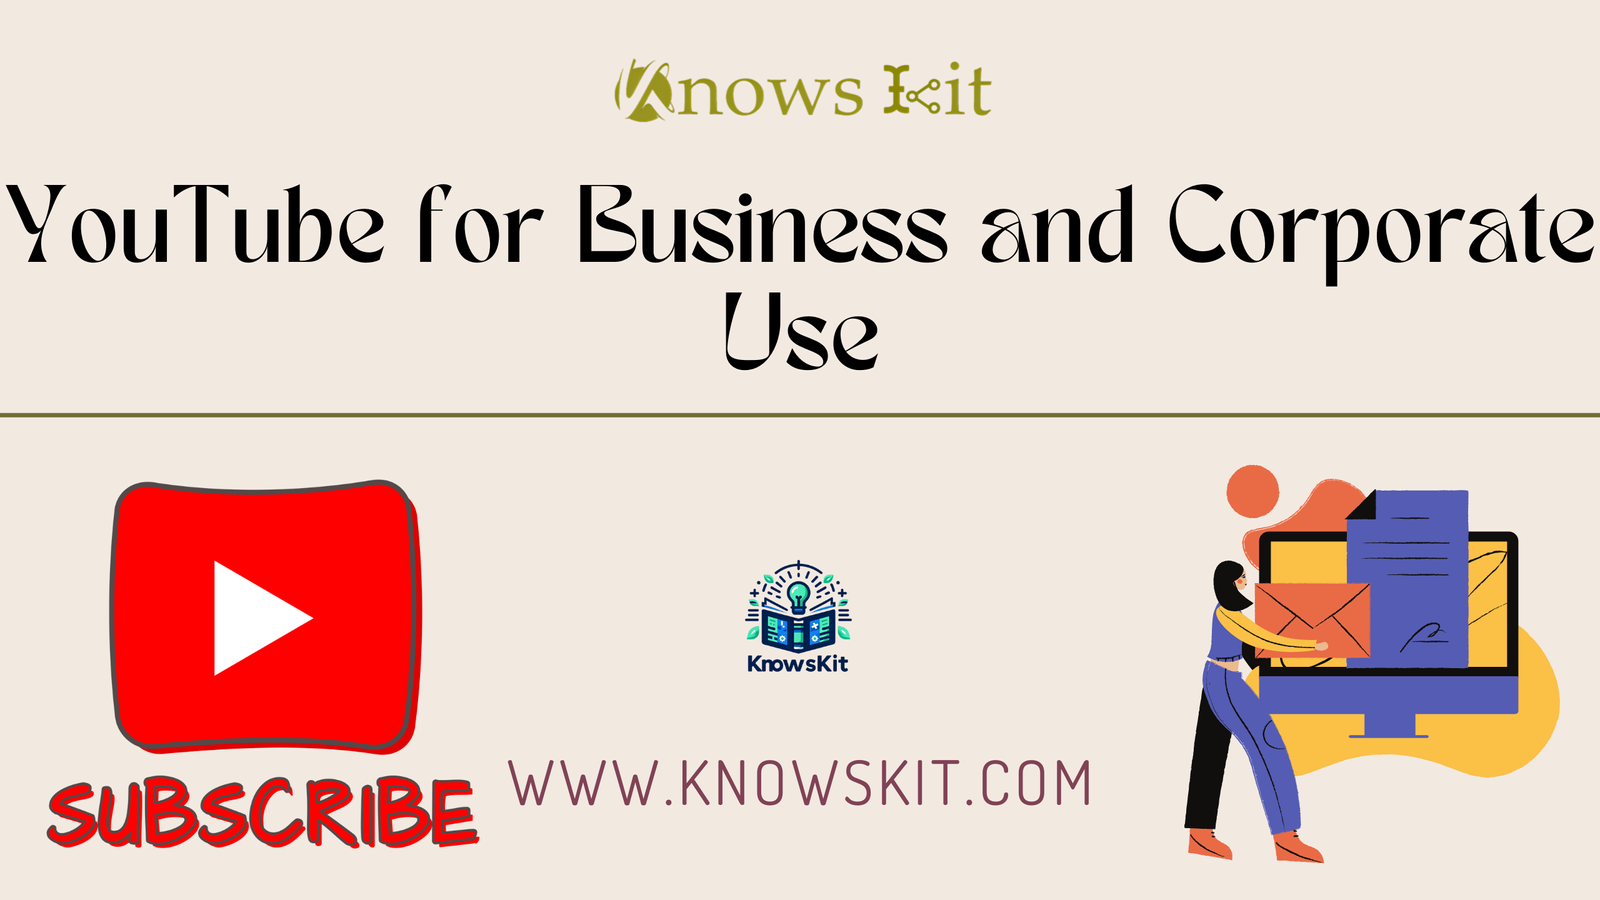 YouTube for Business and Corporate Use